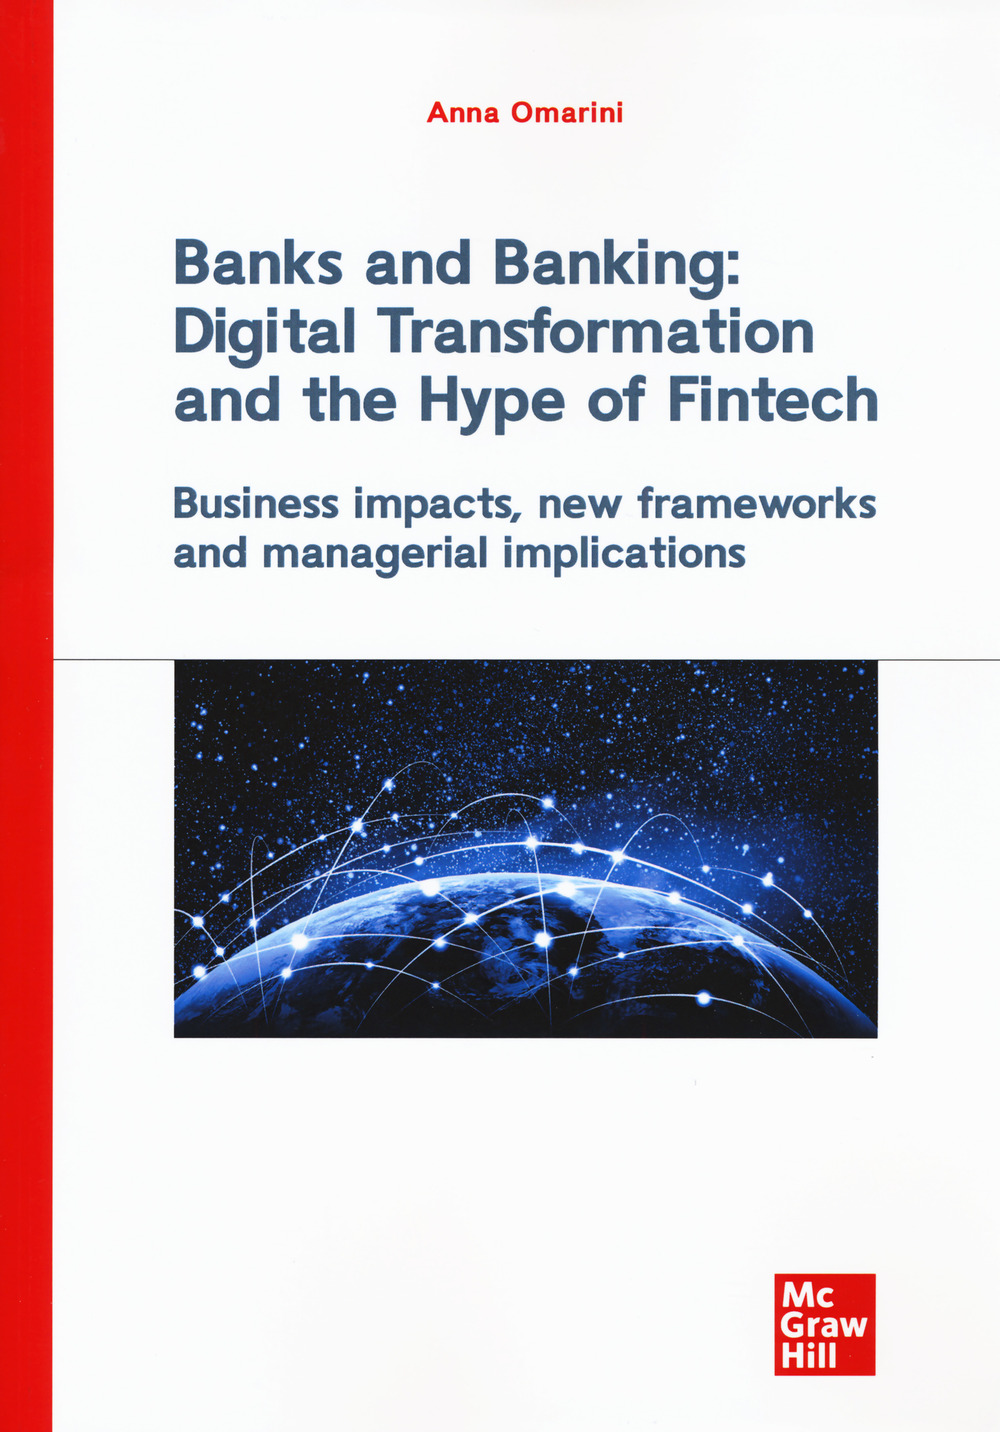 Banks and banking: digital transformation and the hype of fintech. Business impact, new frameworks and managerial implications